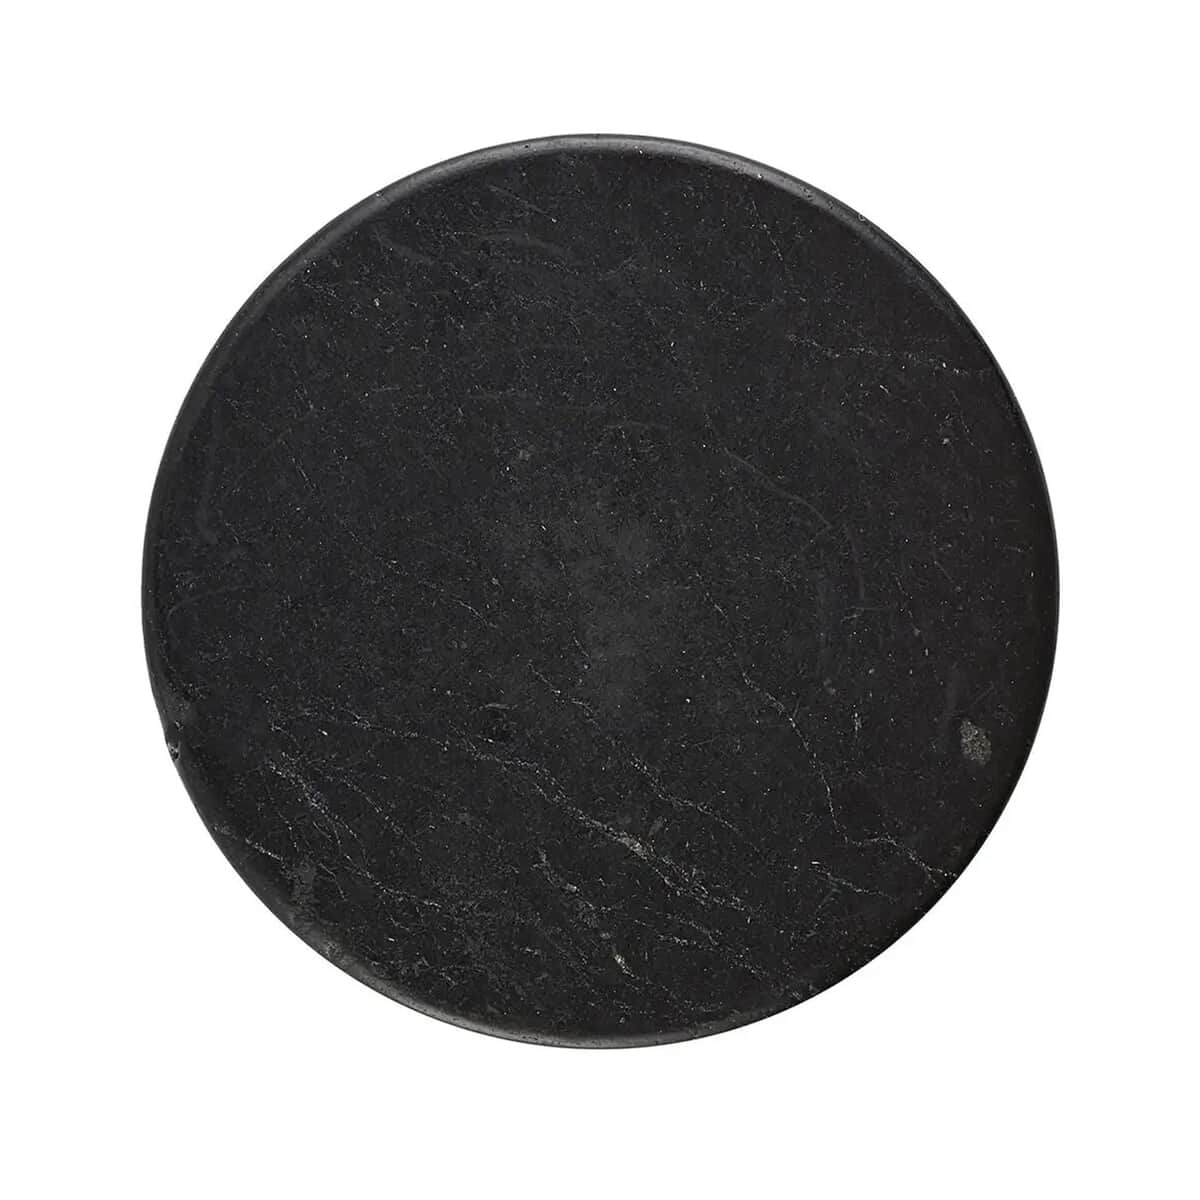 Shungite Plain Round Cellphone Large Tile, Decorative Black Mineral Tile for Mobile Phones 1.25 Approx. 35ctw image number 0